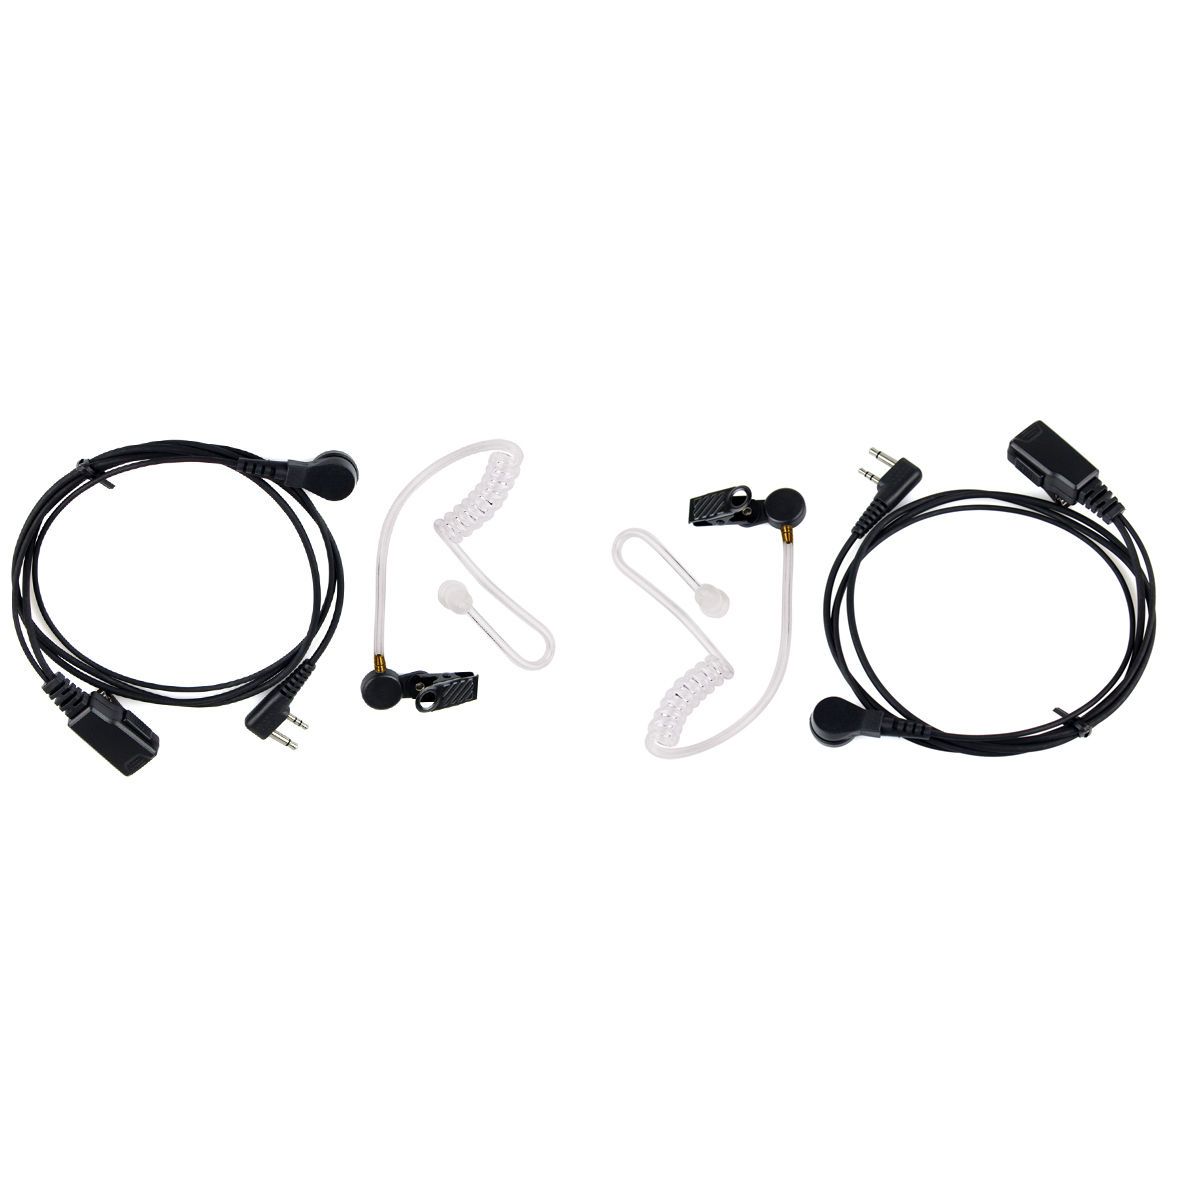 2 pin Acoustic Tube headsets Earpieces for ICOM IC-F3 IC-F3S IC-F4 IC-F10 Radios 